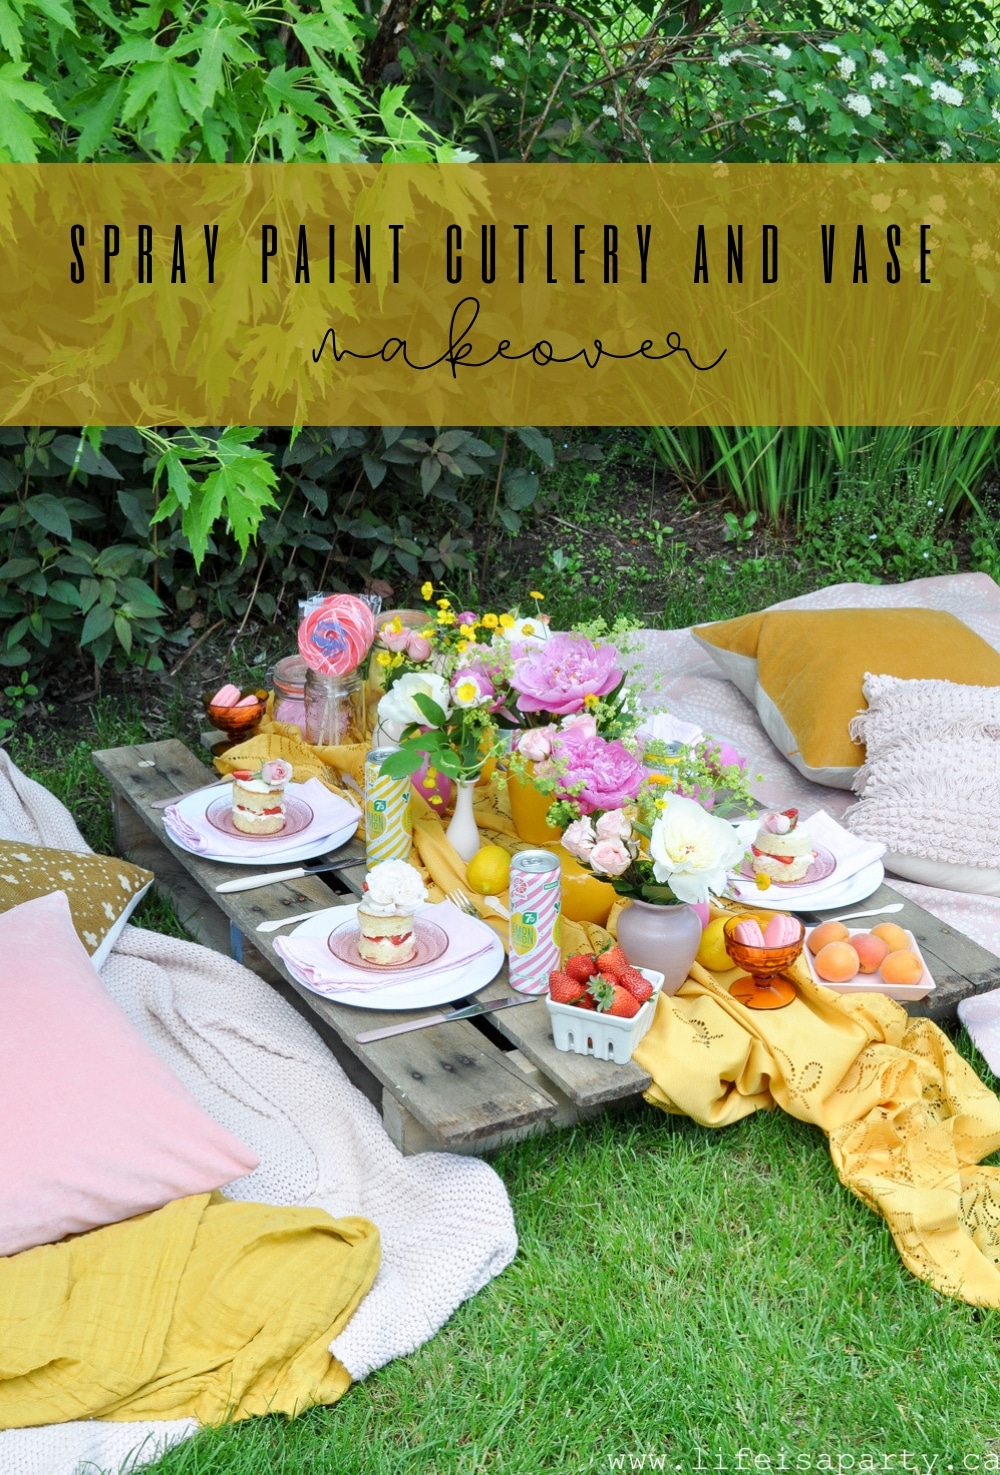 Spray Paint Cutlery and Vase Makeover: give inexpensive thrift store vases and cutlery new life with spray paint, perfect for entertaining.